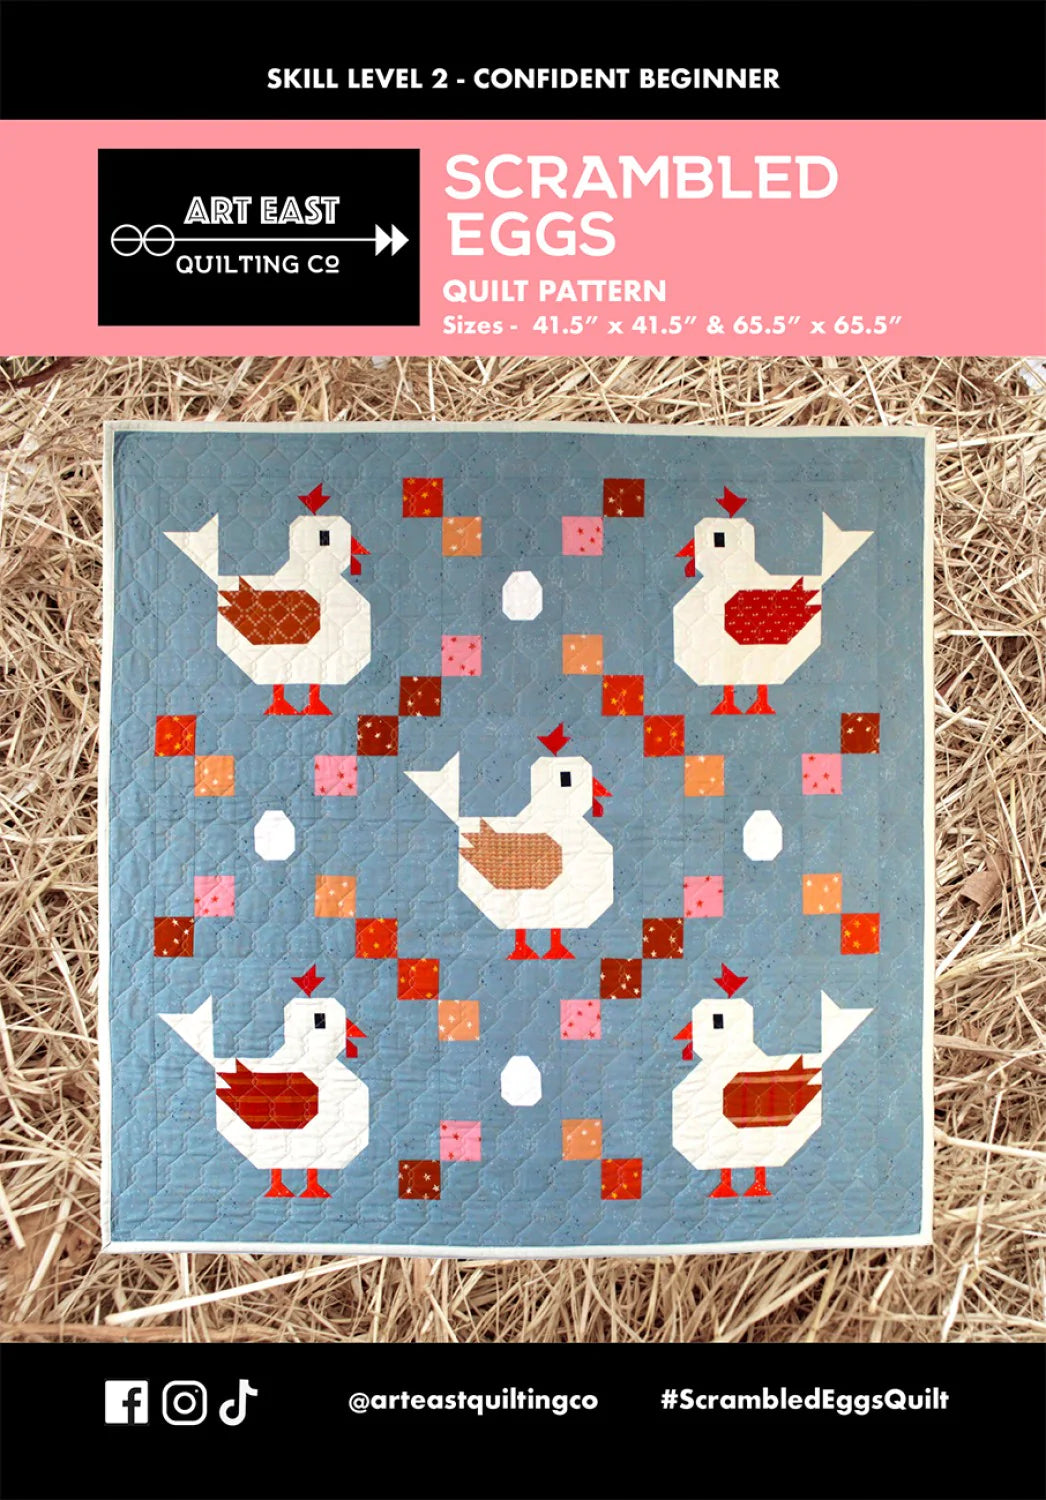 Scrambled Eggs by Art East Quilting Co